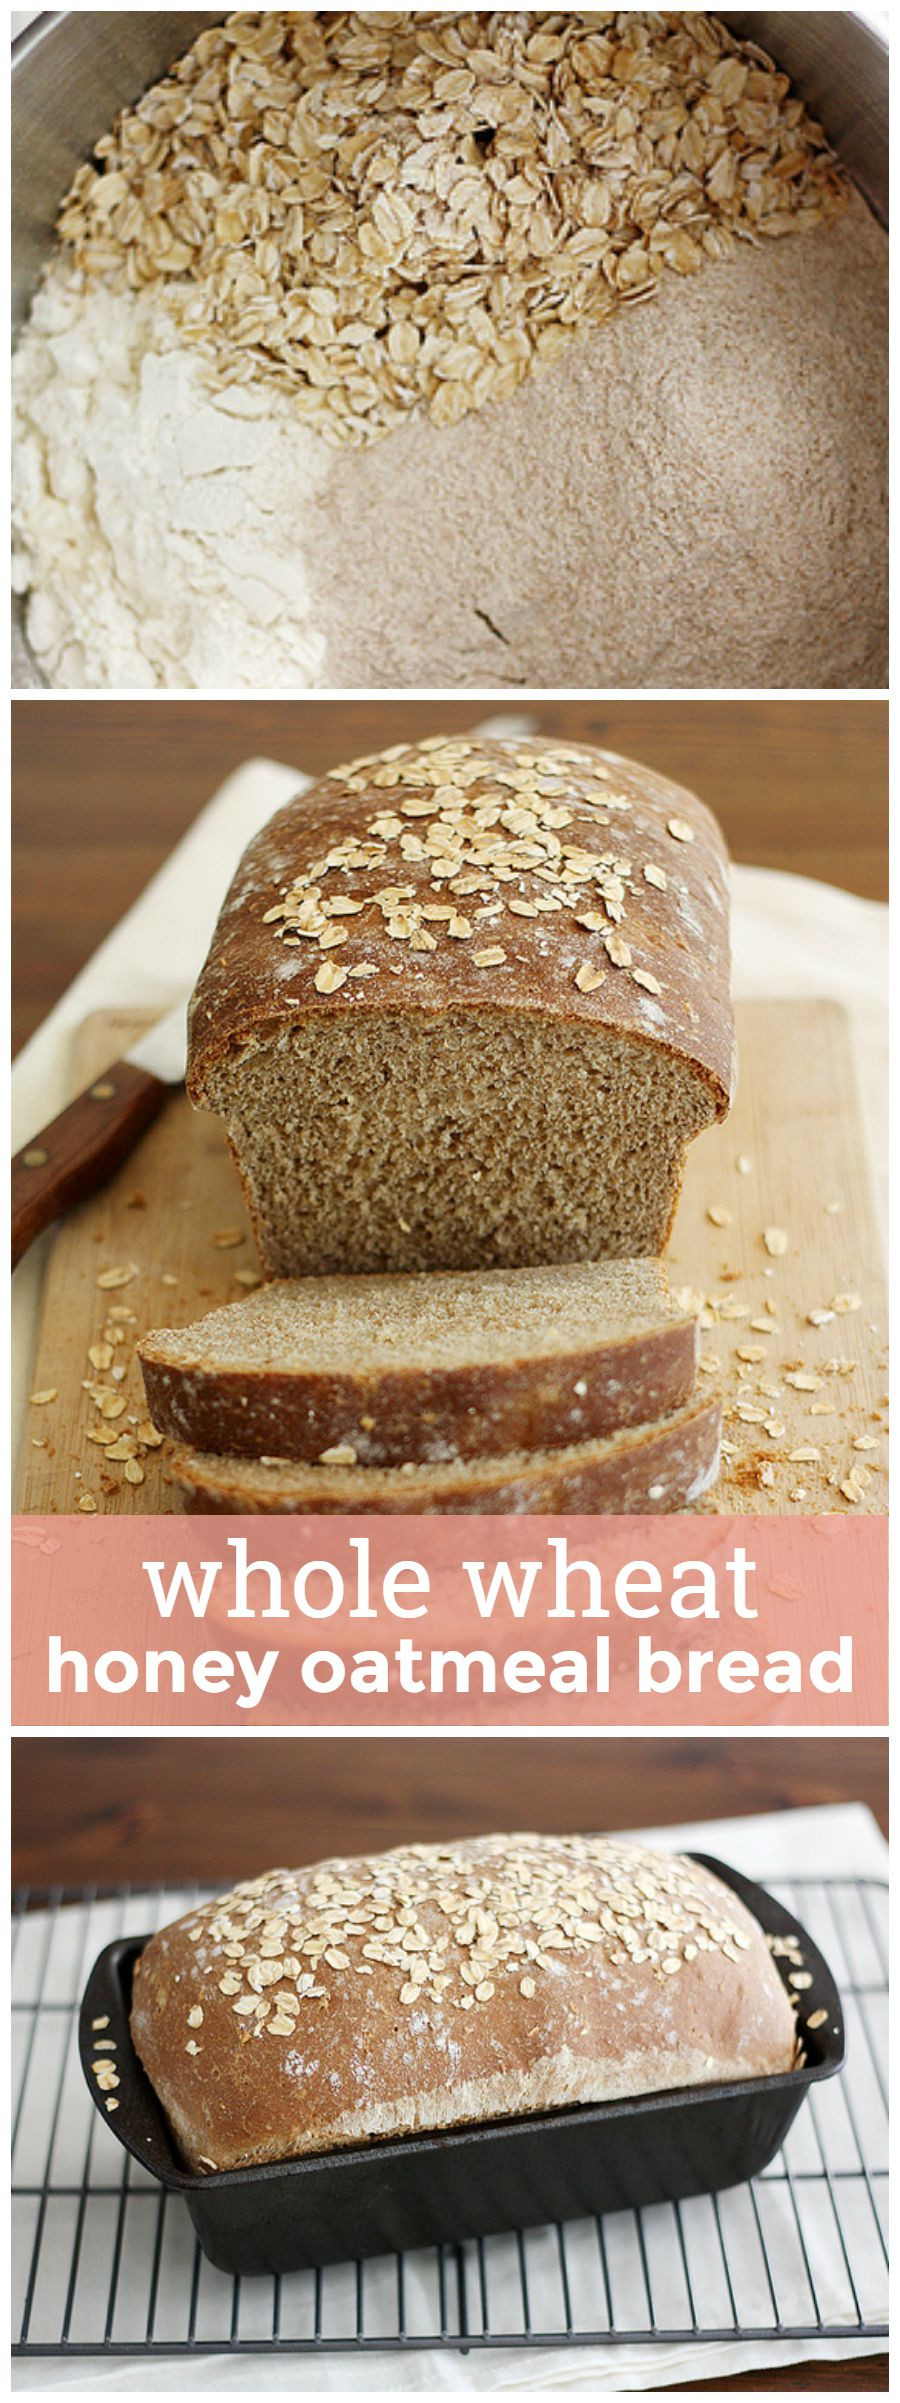 Whole Wheat Bread Healthy
 is honey wheat bread healthy for you